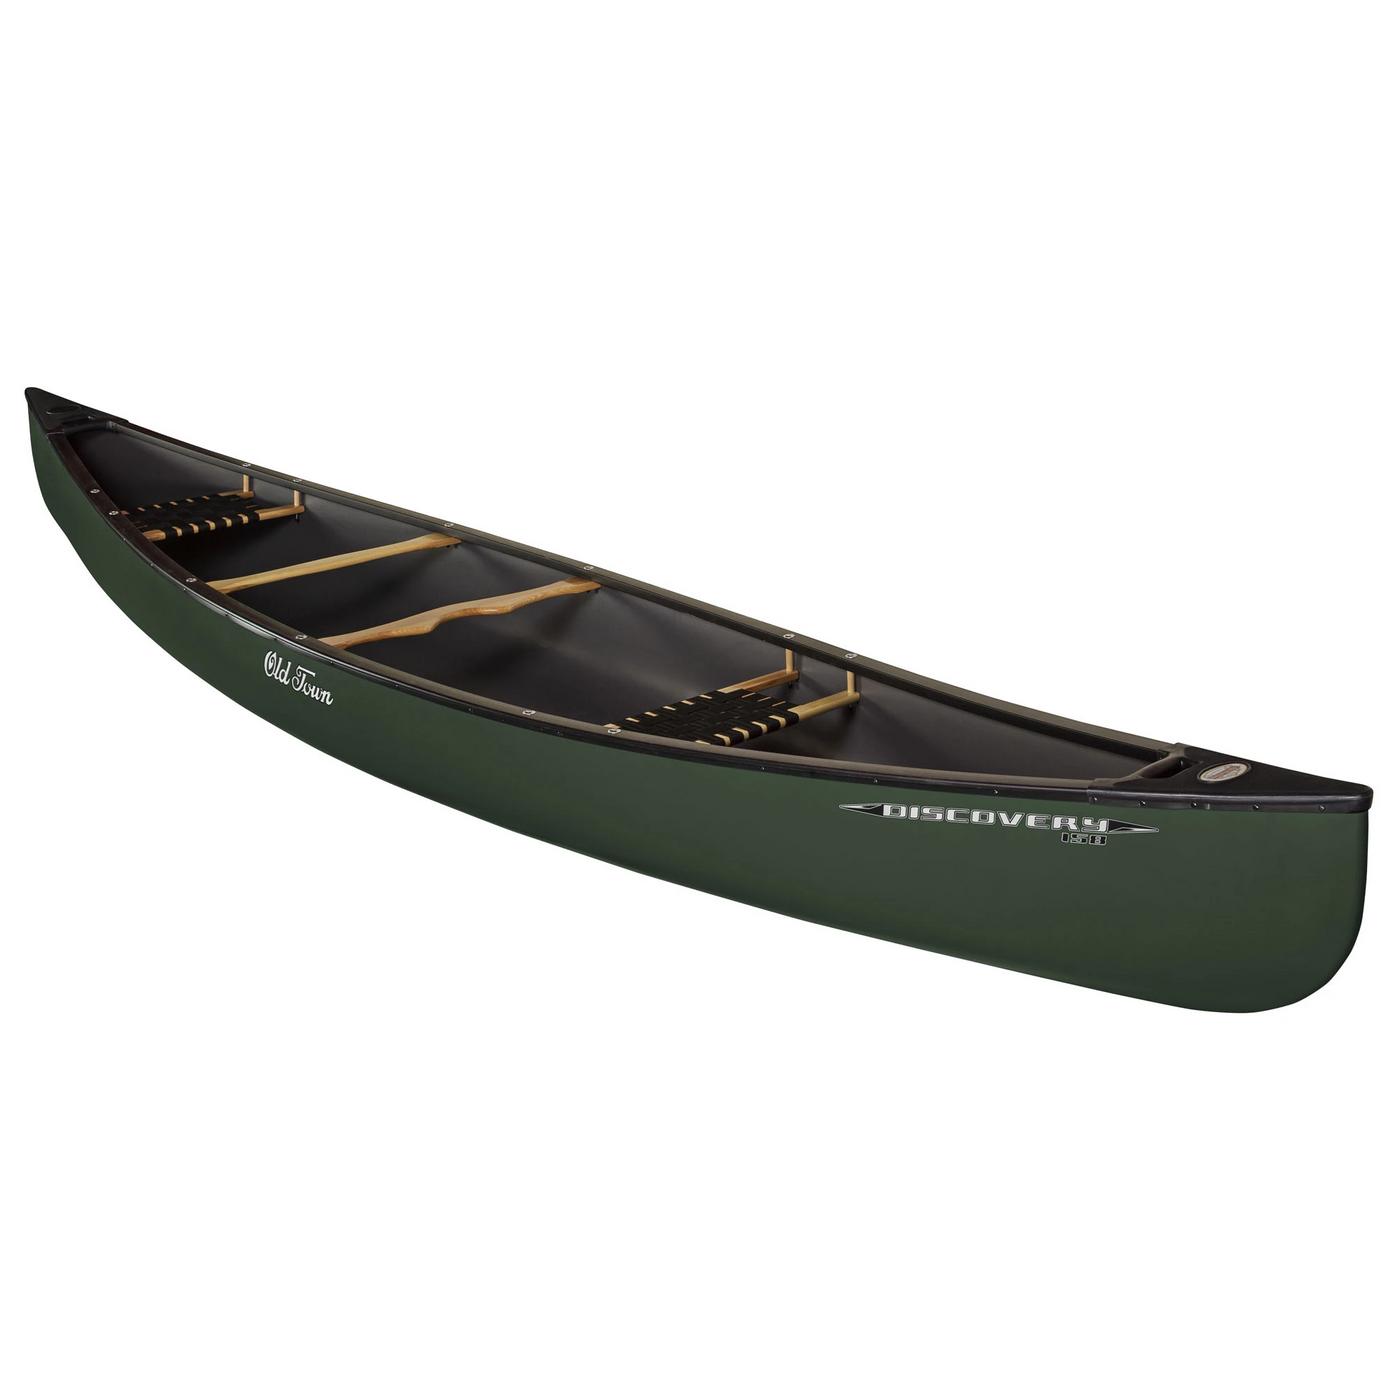 Old Town Discovery 158 Canoe